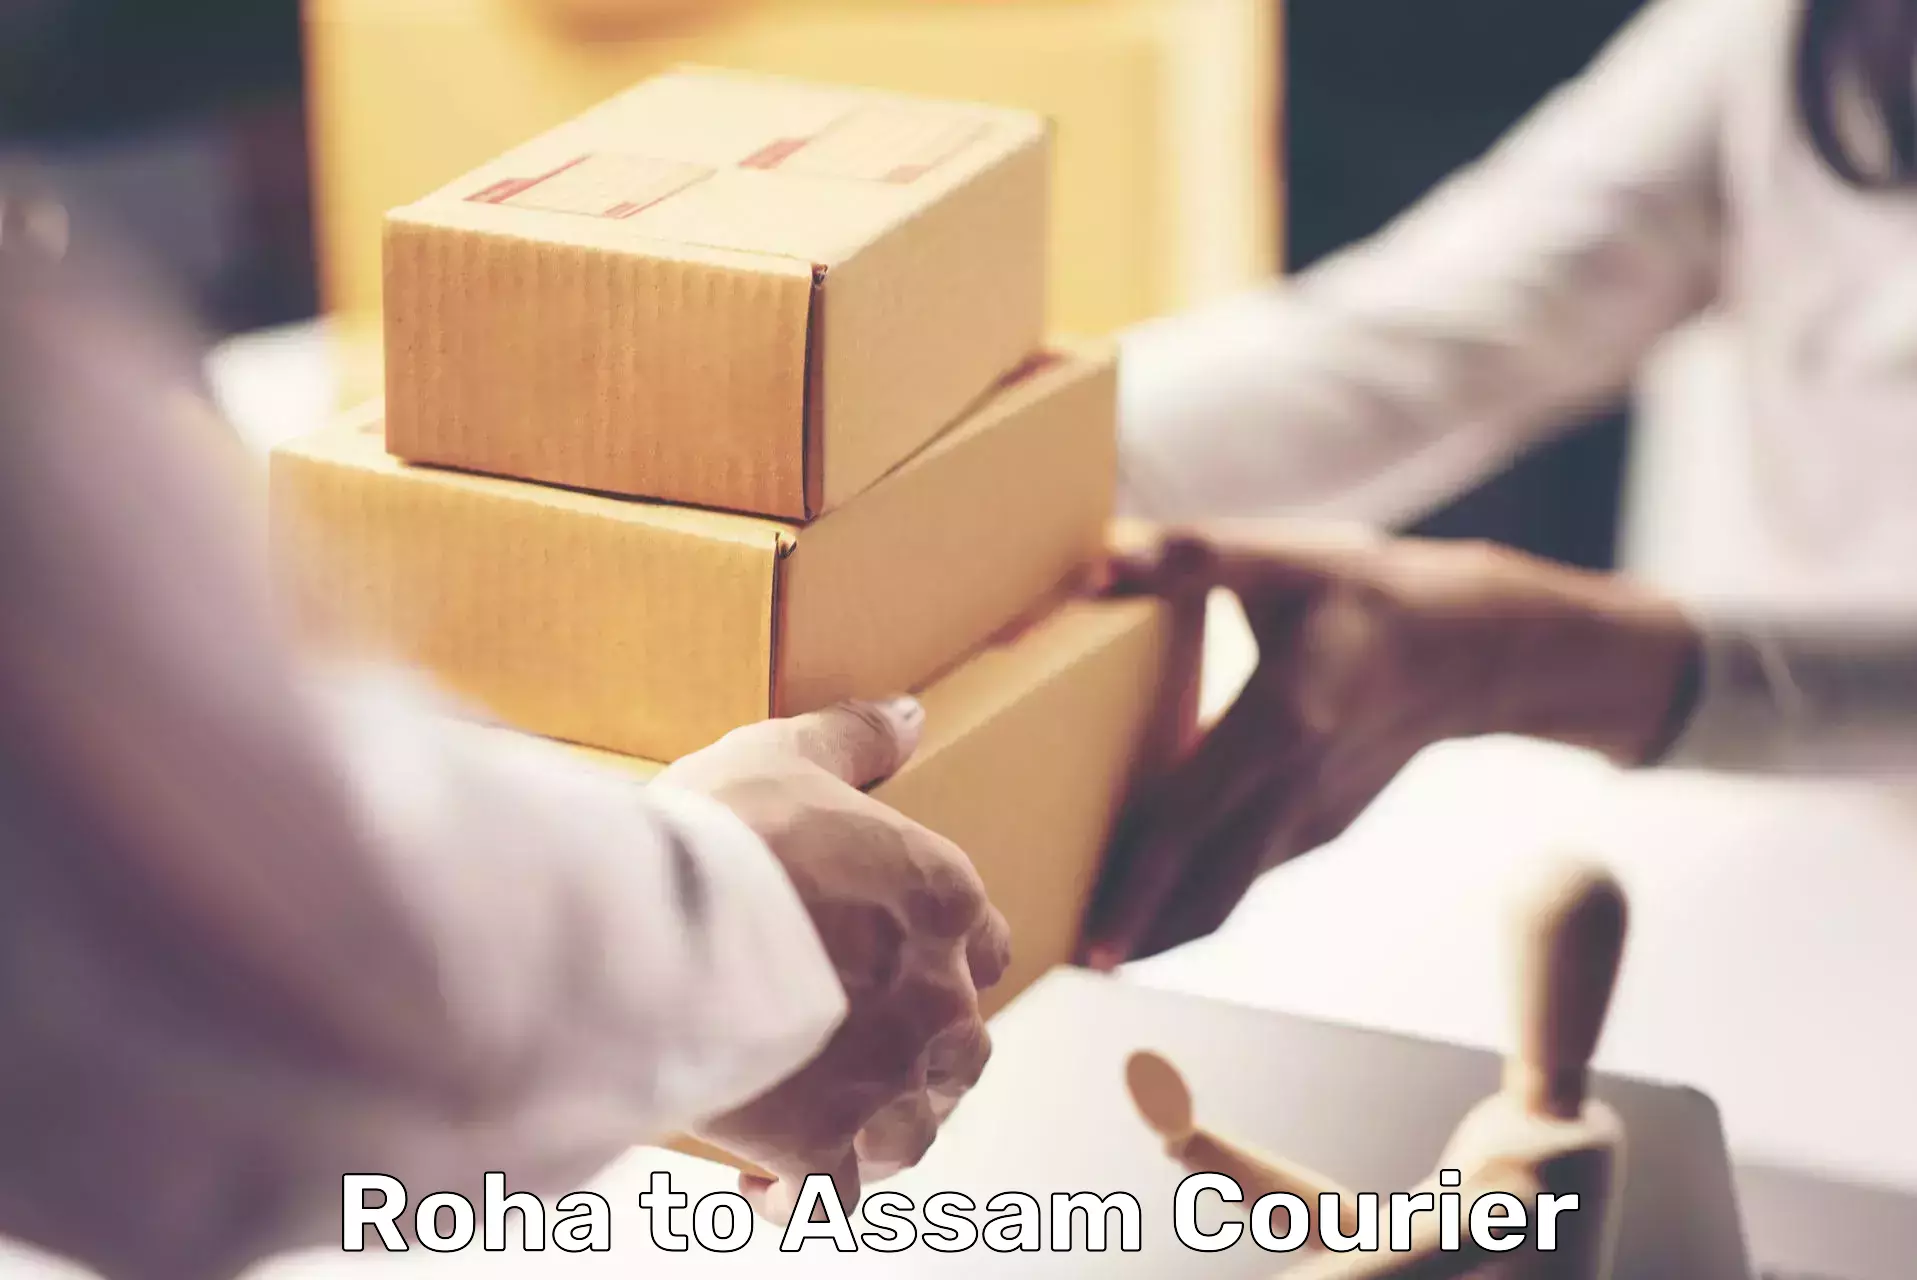 Individual parcel service Roha to Assam